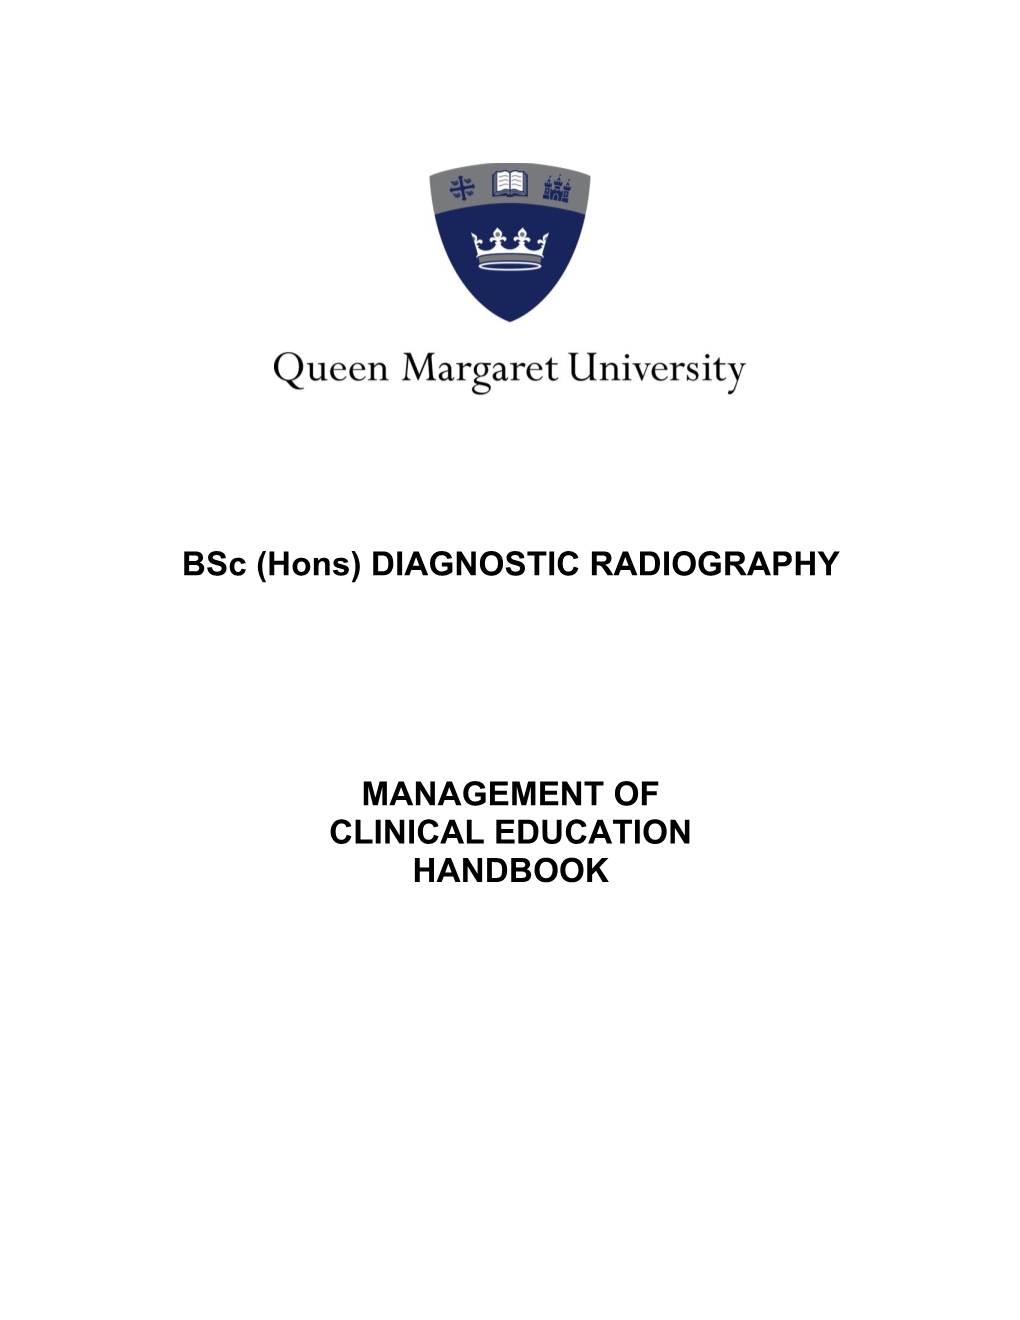 (Hons) DIAGNOSTIC RADIOGRAPHY MANAGEMENT of CLINICAL